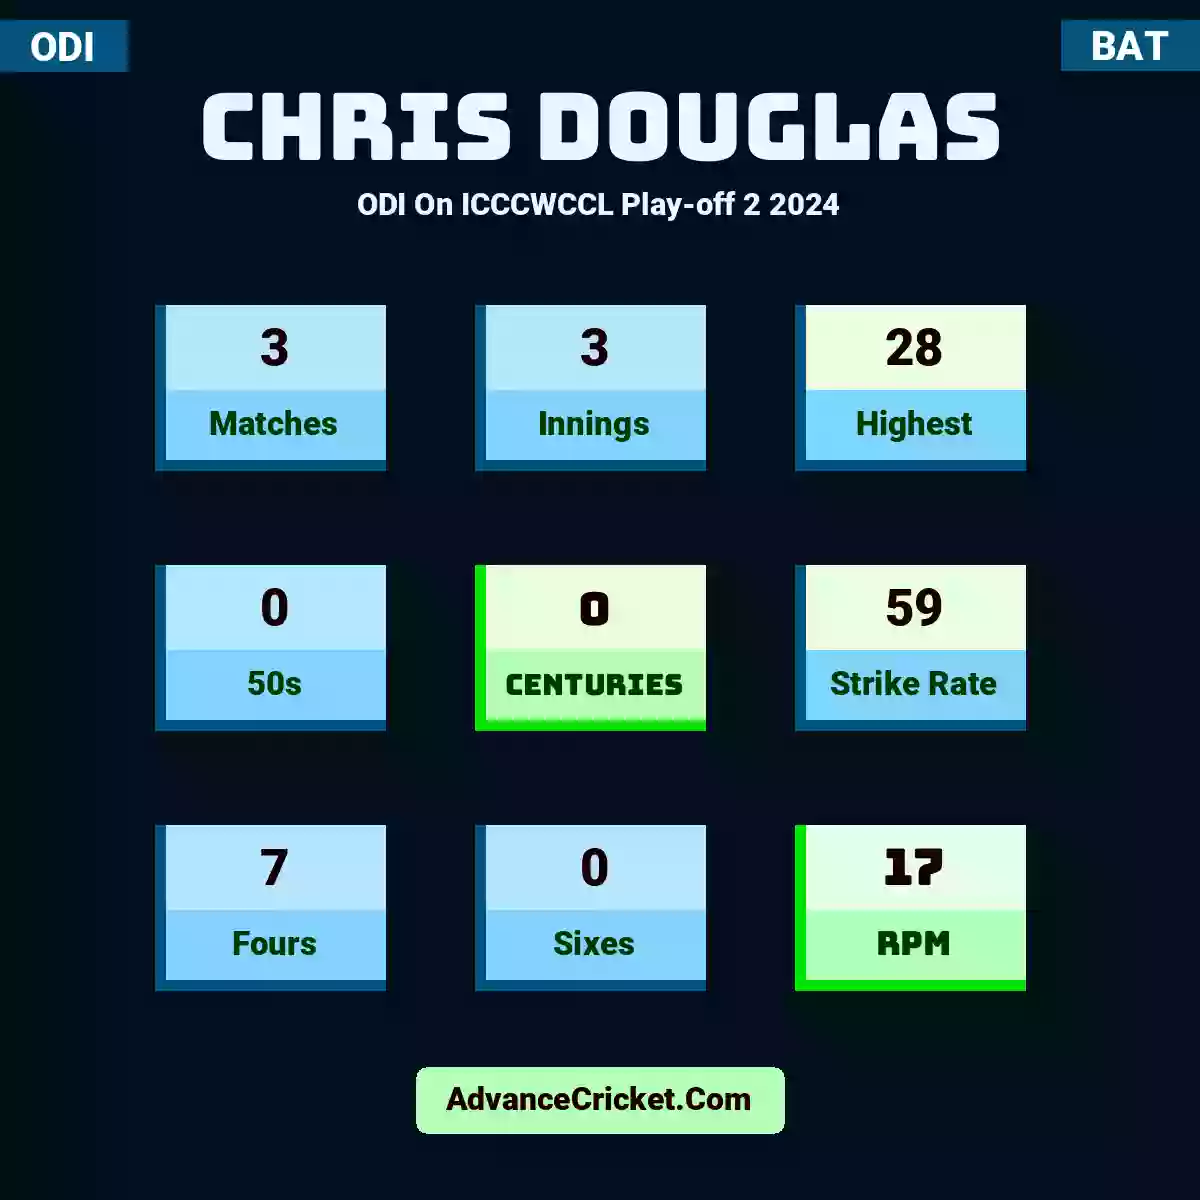 Chris Douglas ODI  On ICCCWCCL Play-off 2 2024, Chris Douglas played 3 matches, scored 28 runs as highest, 0 half-centuries, and 0 centuries, with a strike rate of 59. C.Douglas hit 7 fours and 0 sixes, with an RPM of 17.